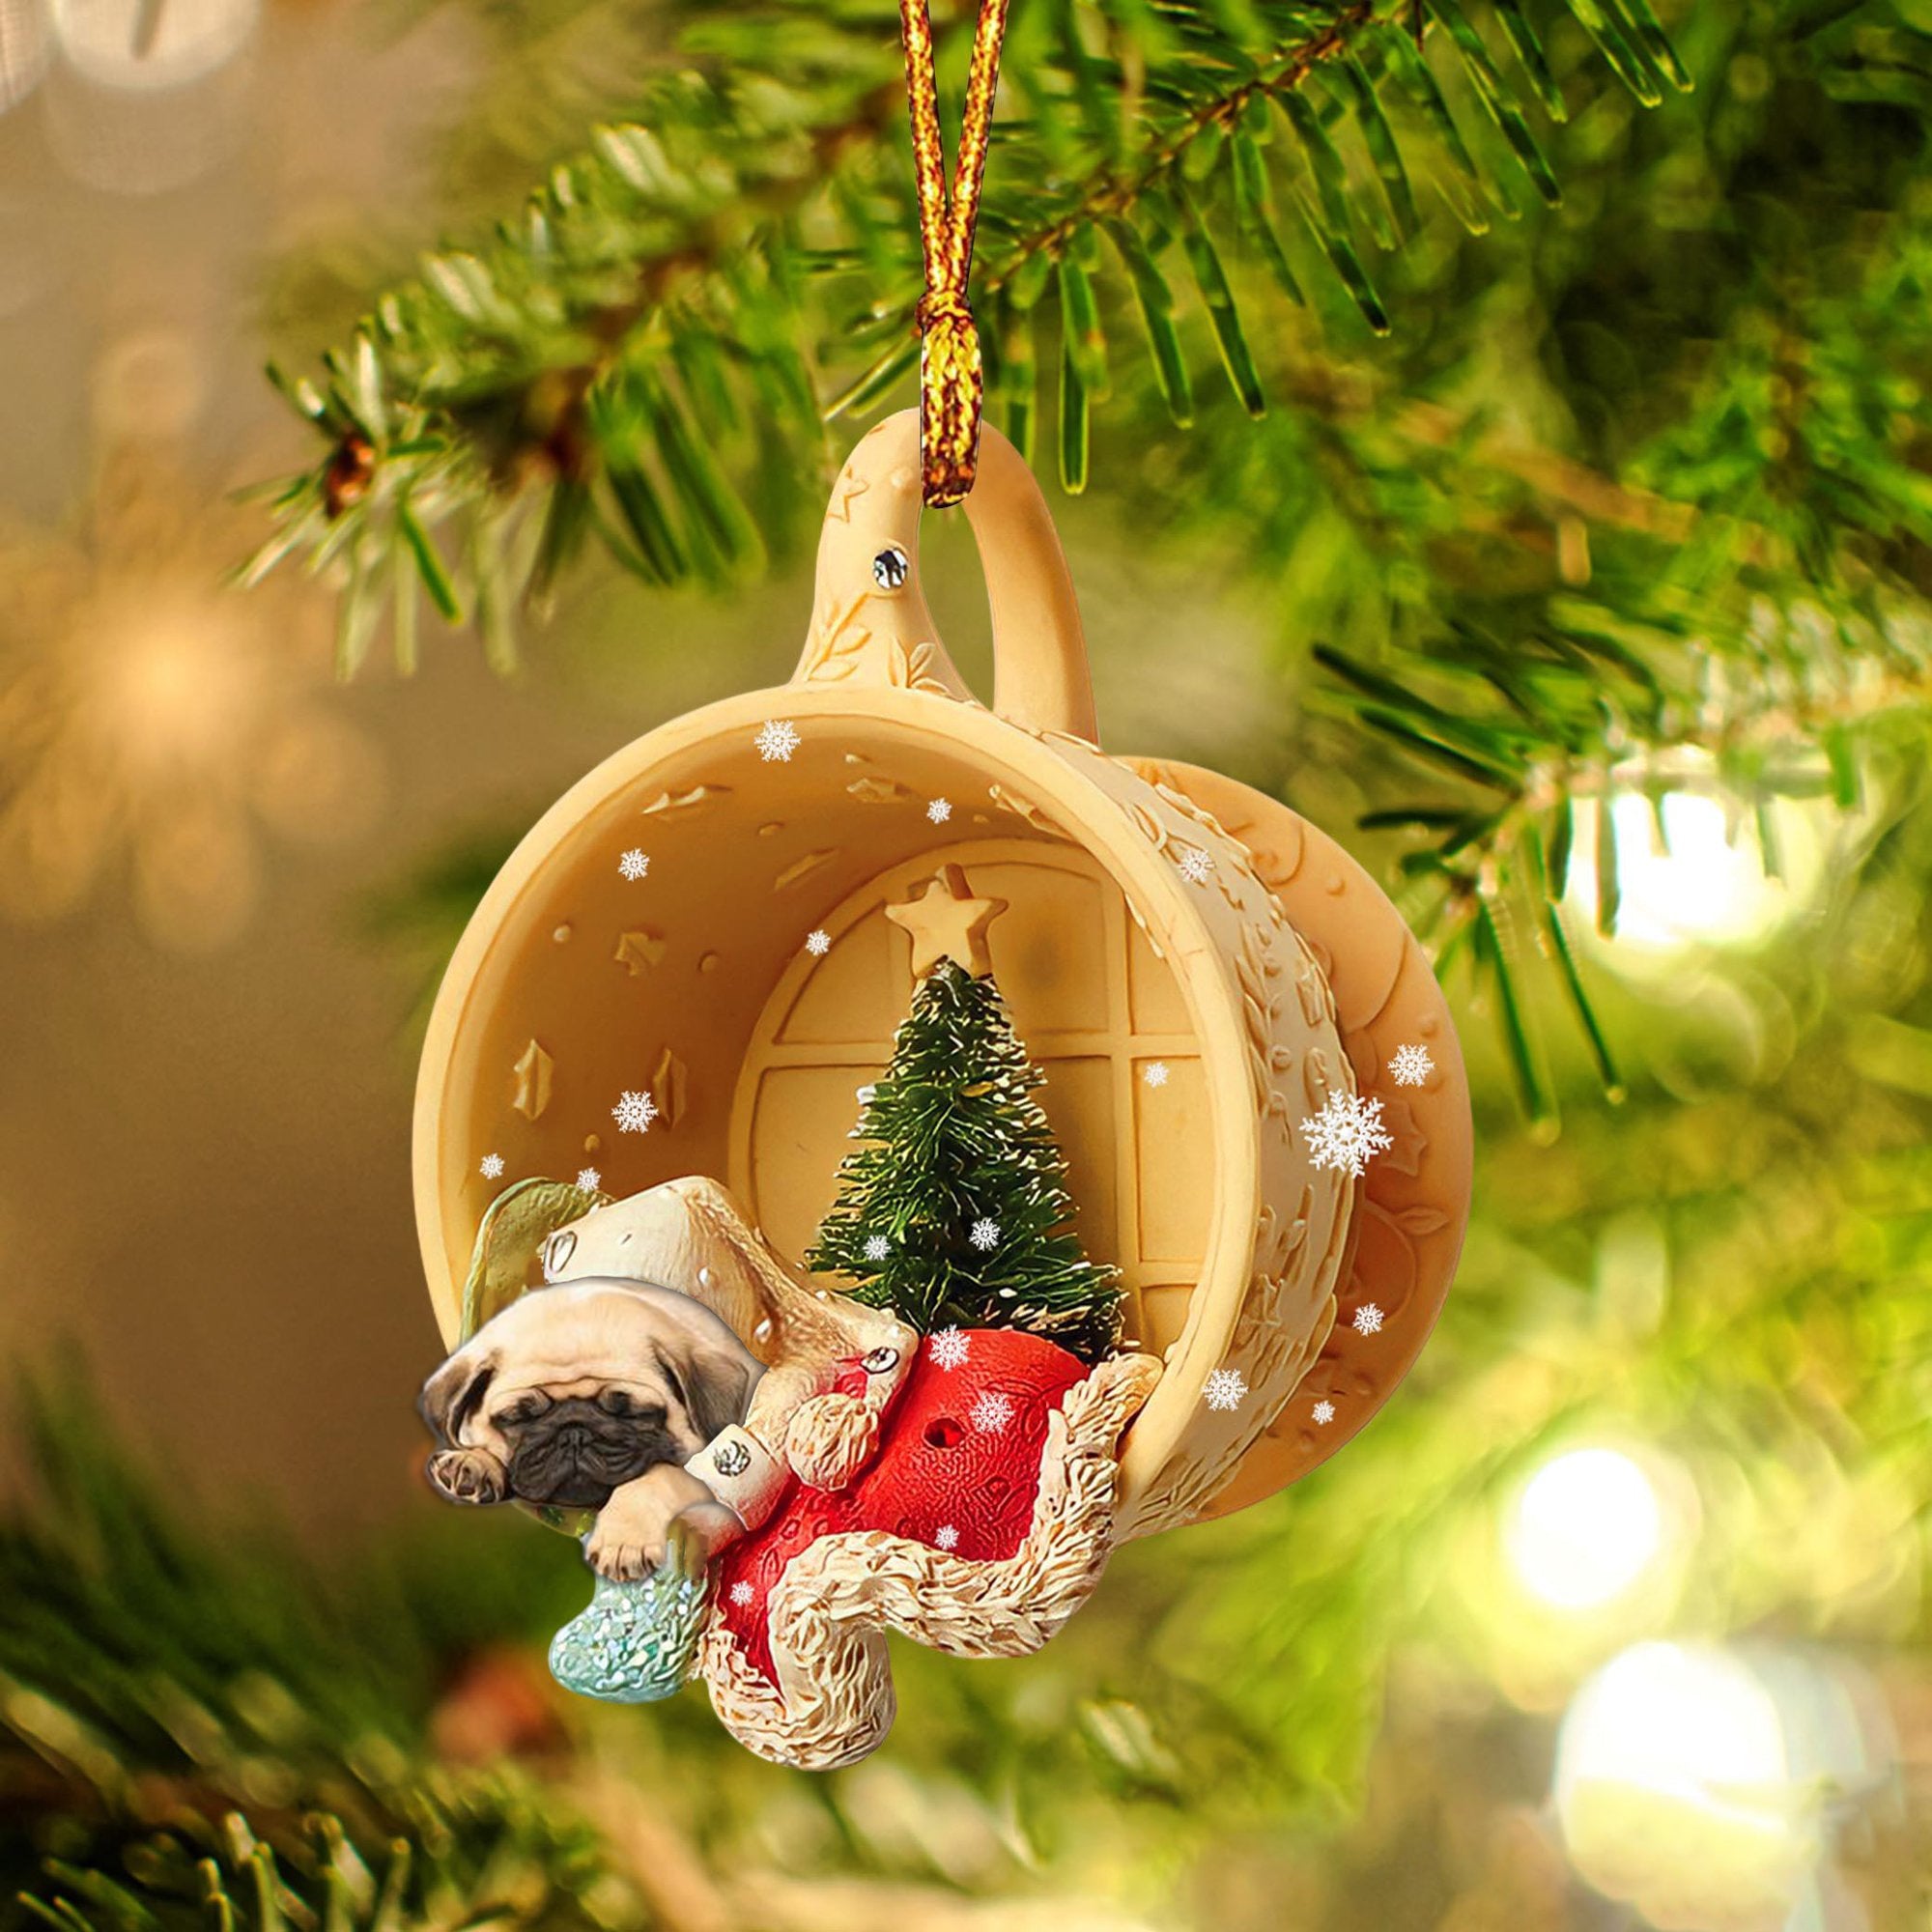 Pug Sleeping In A Cup Christmas Ornament